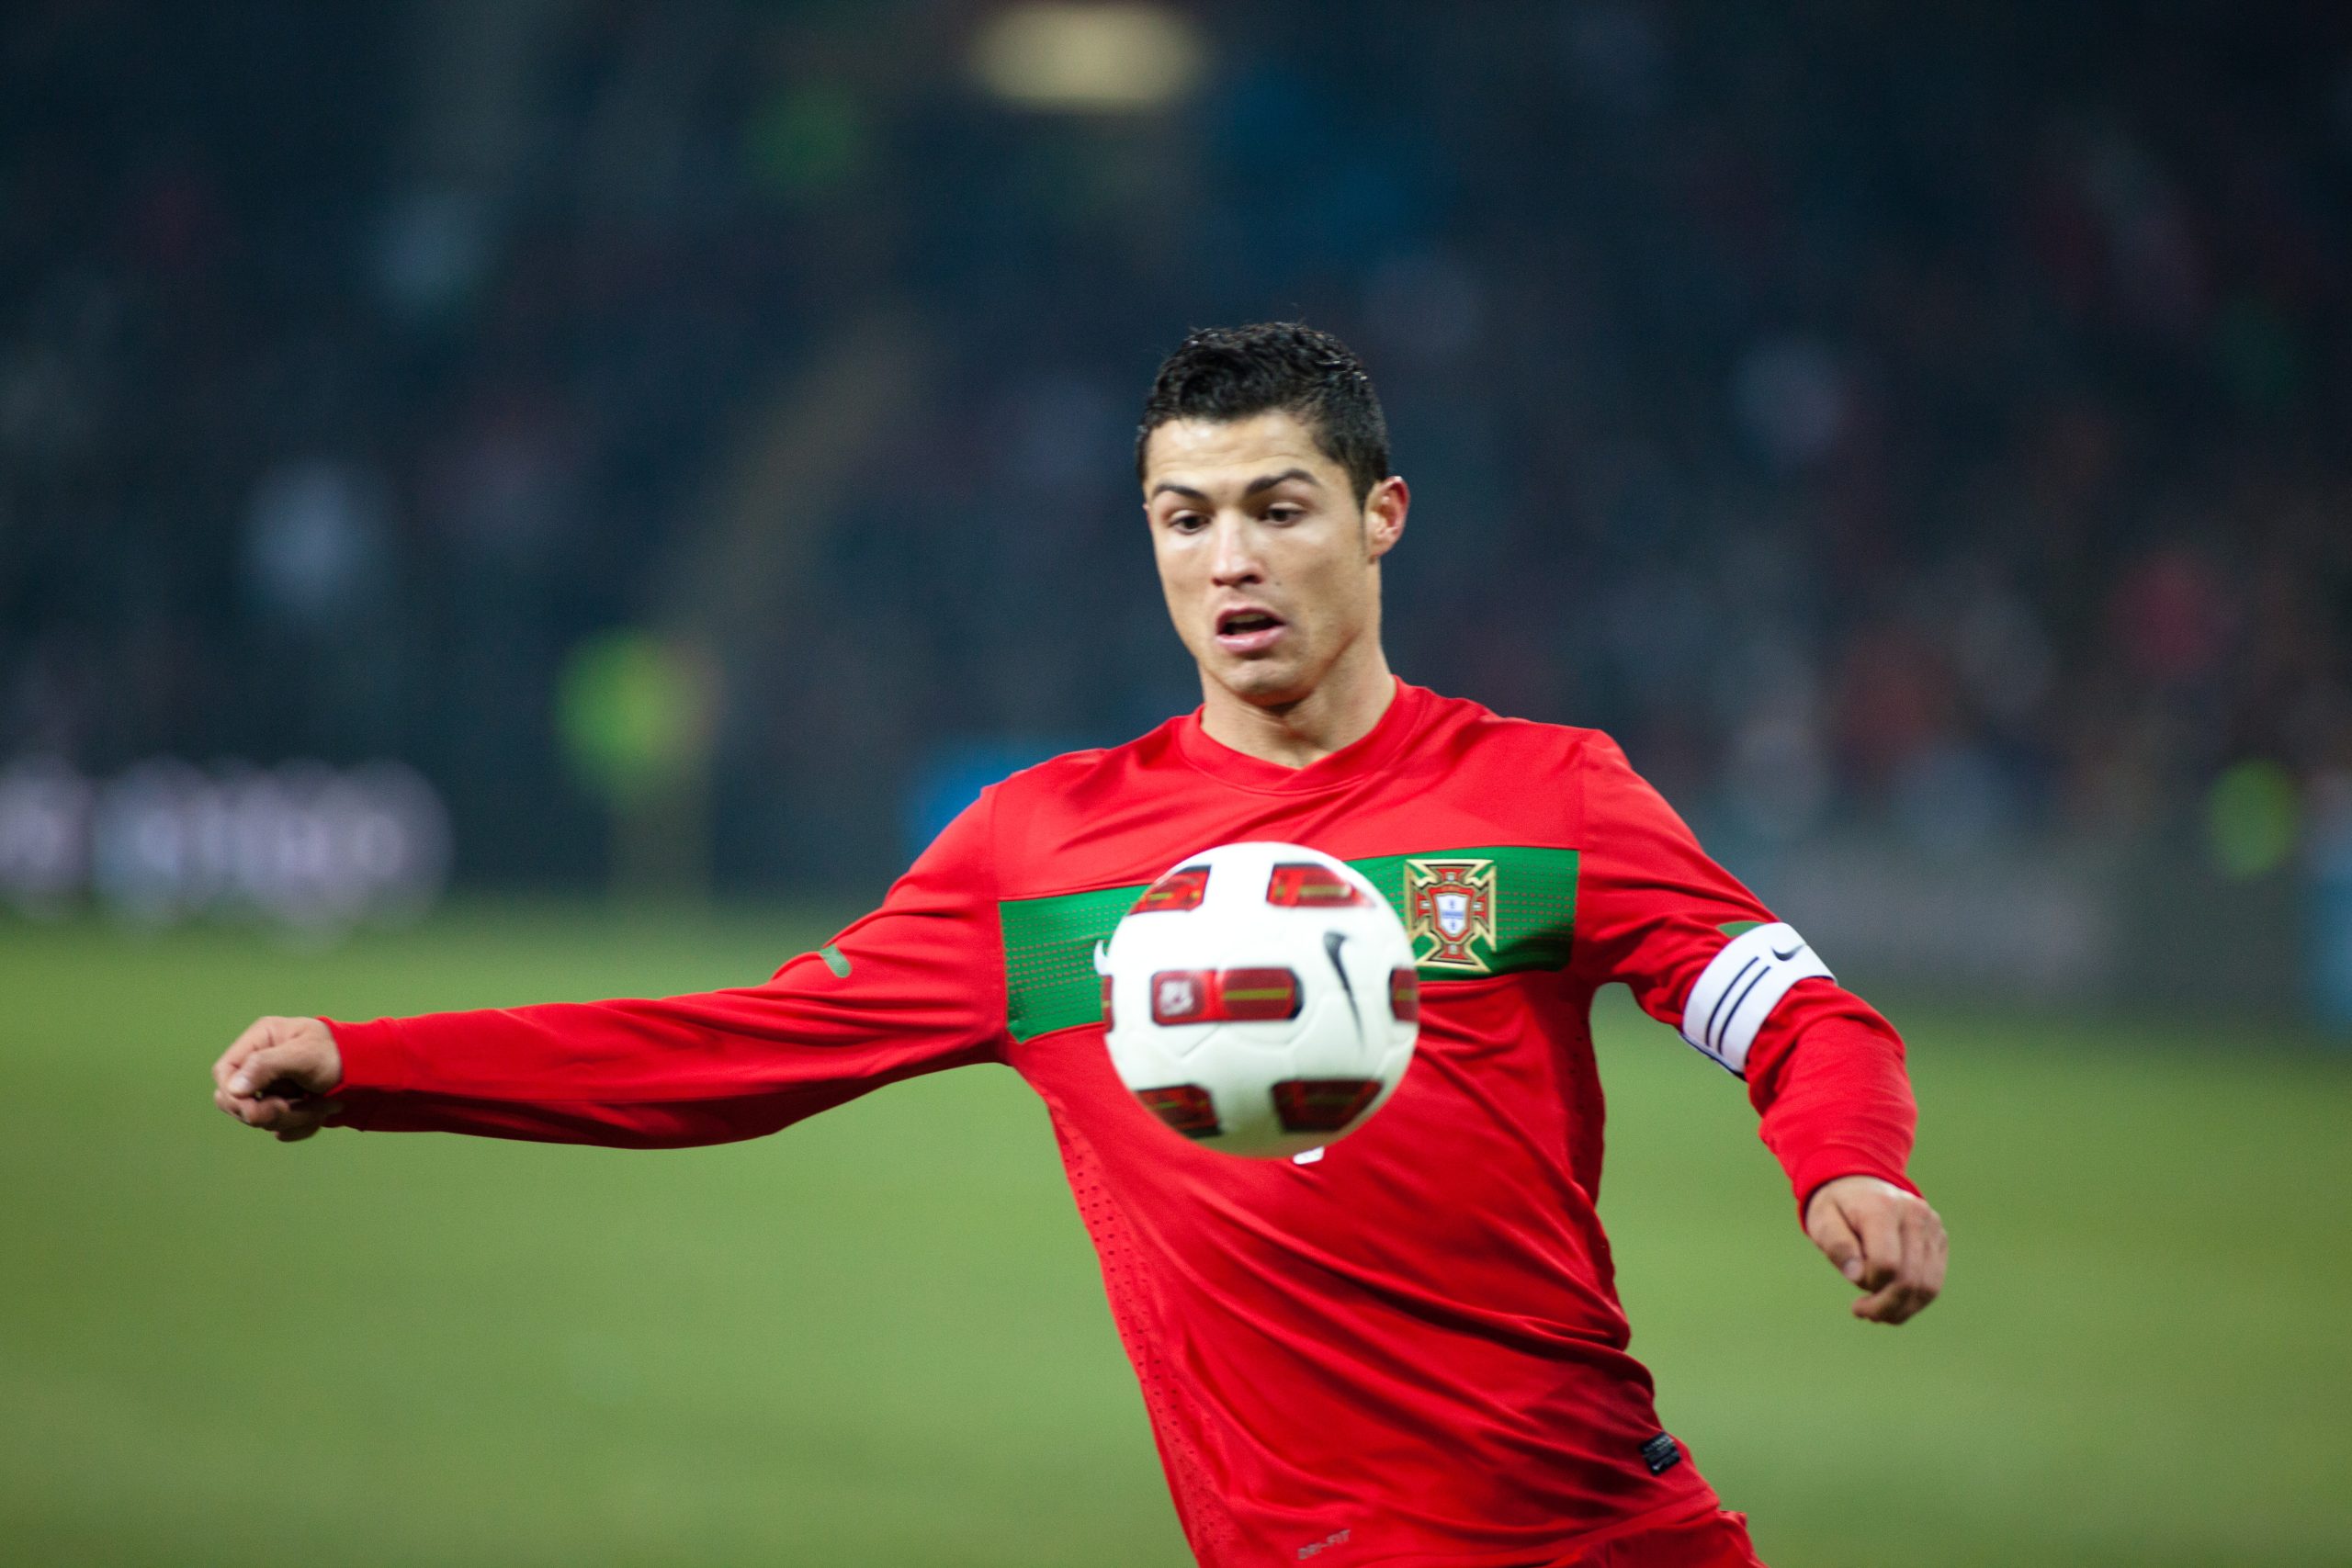 Portugal 3-2 Ghana: Player ratings as Ronaldo sets record in crazy